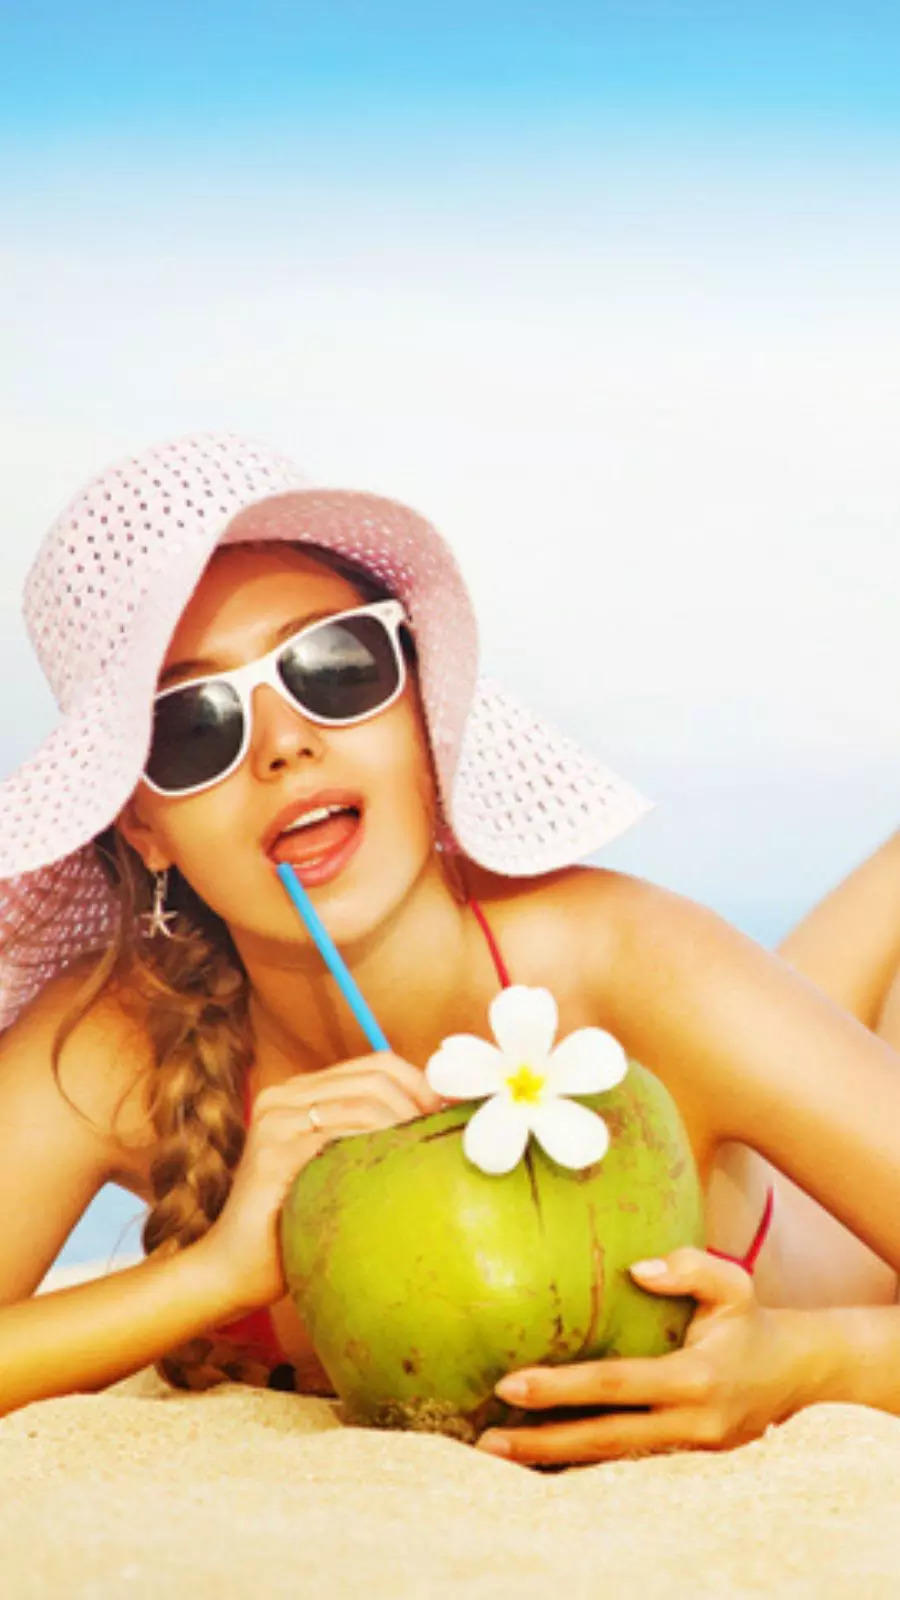 Refreshing summer drinks with coconut water to cool your body